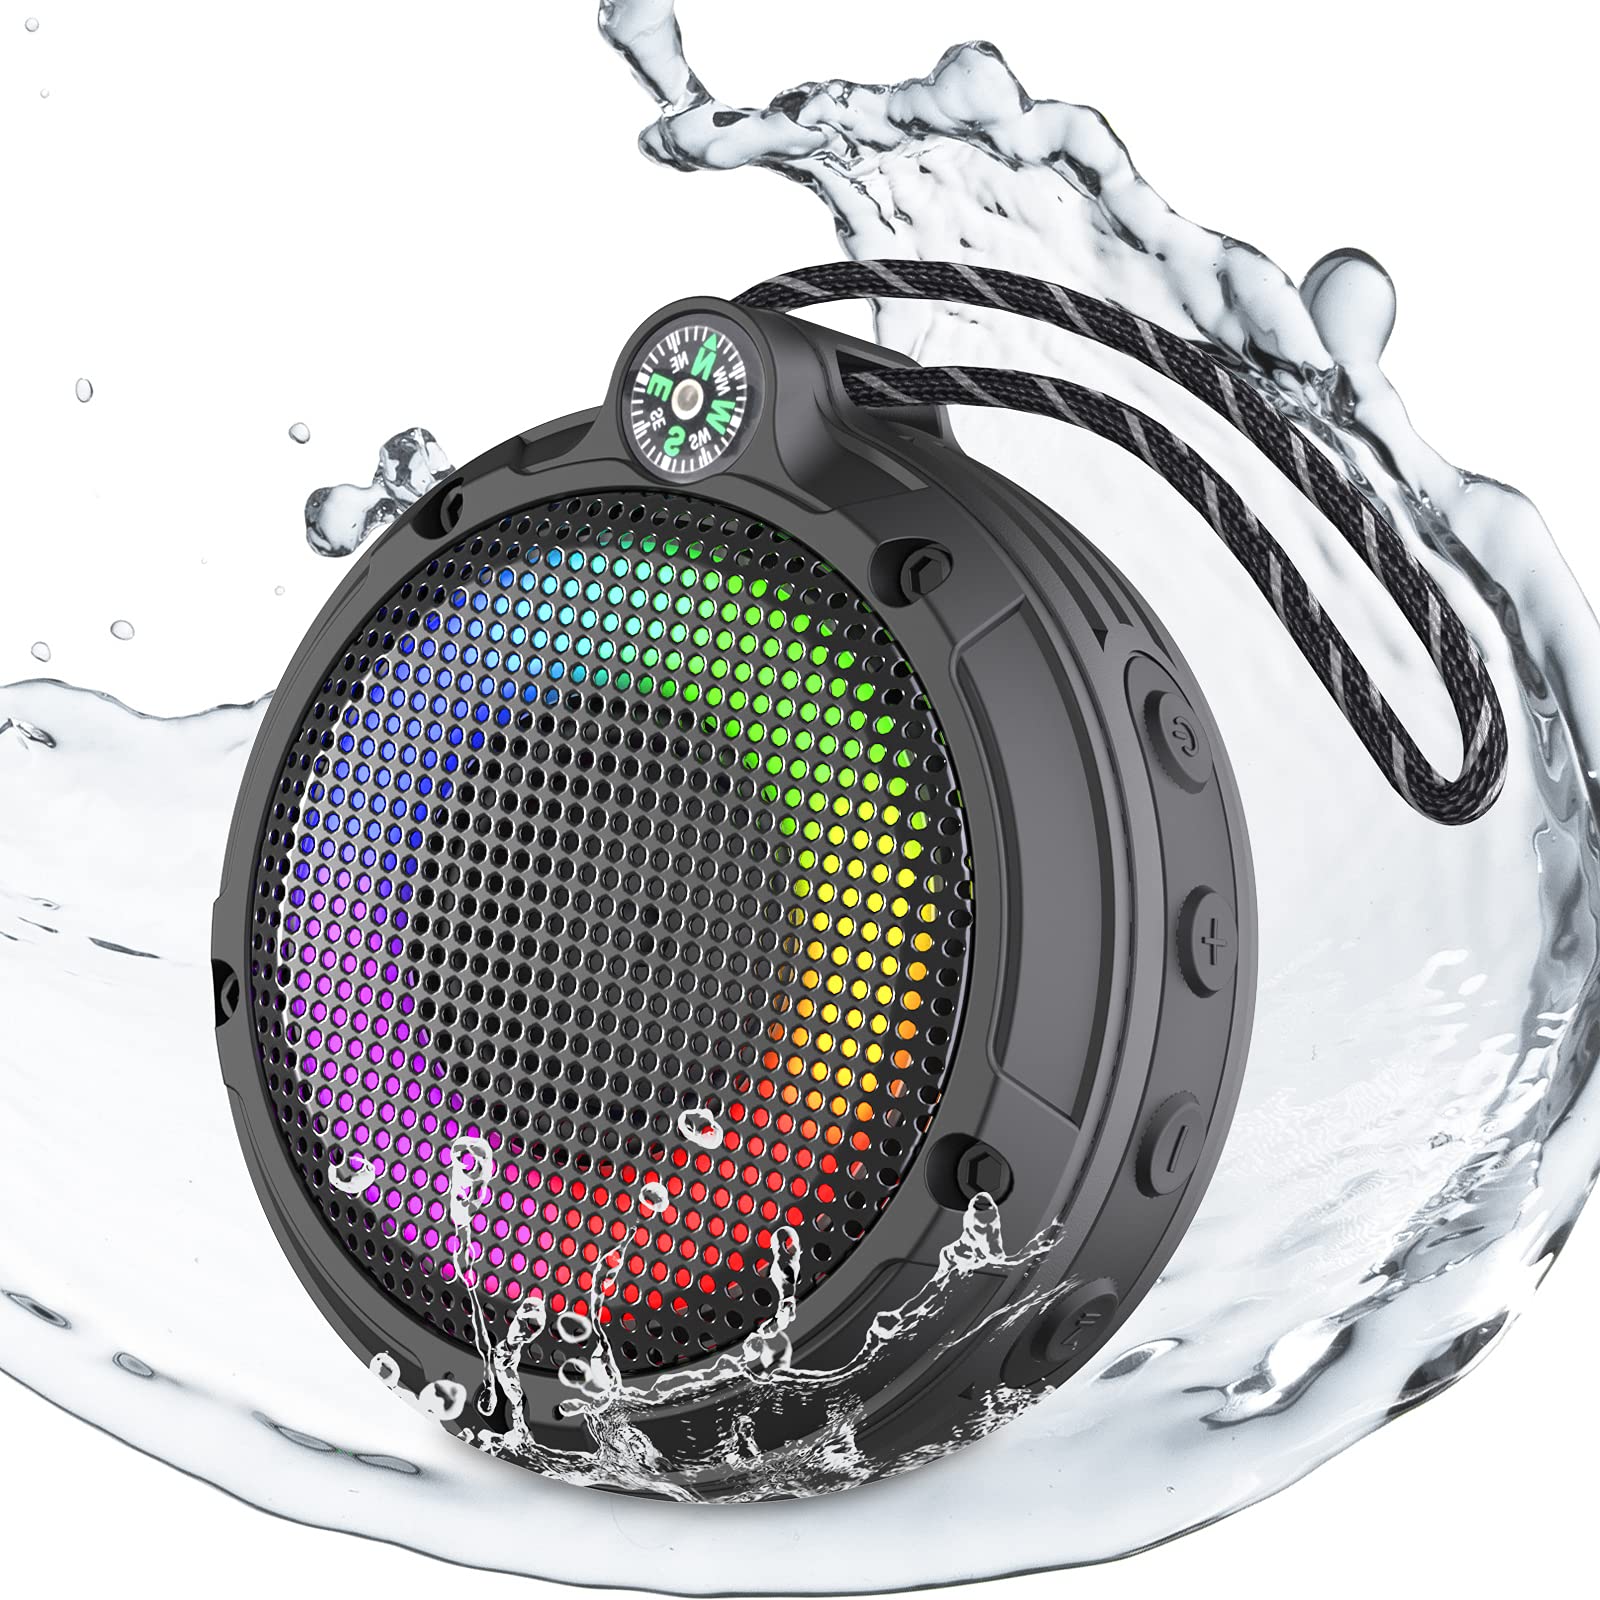 Ortizan Bluetooth Shower Speaker, IPX7 Waterproof Mini Speaker with LED Lights, Portable Outdoor Wireless Speaker with 8W & 24H Playtime, Perfect for Shower, Bike, Hike, Support TF Card, FM Radio